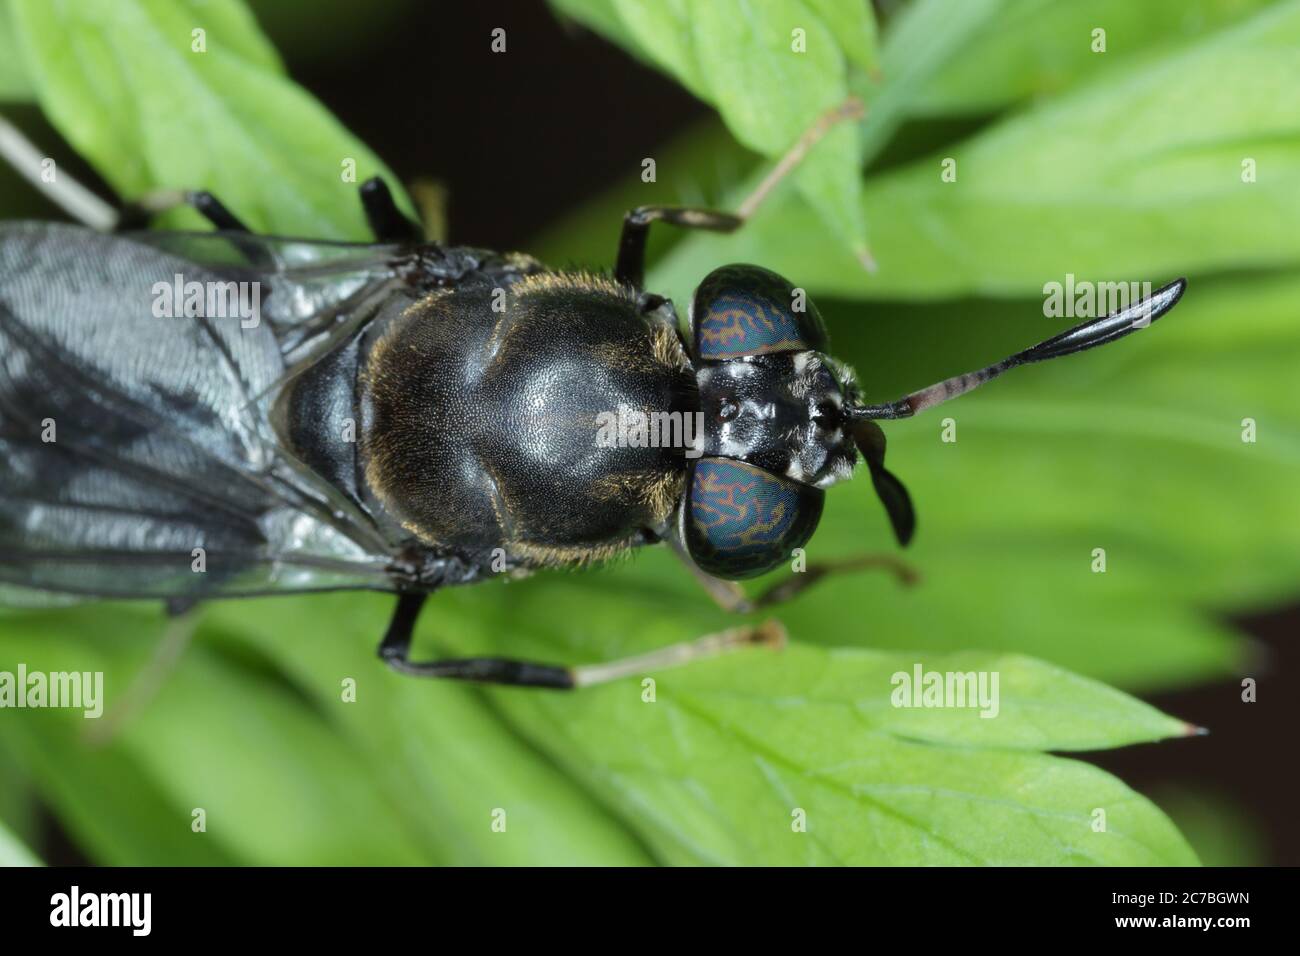 Black Soldier Fly - latin name is Hermetia illucens.  Close-up of fly sitting on a leaf. This species is used in the production of protein. Stock Photo